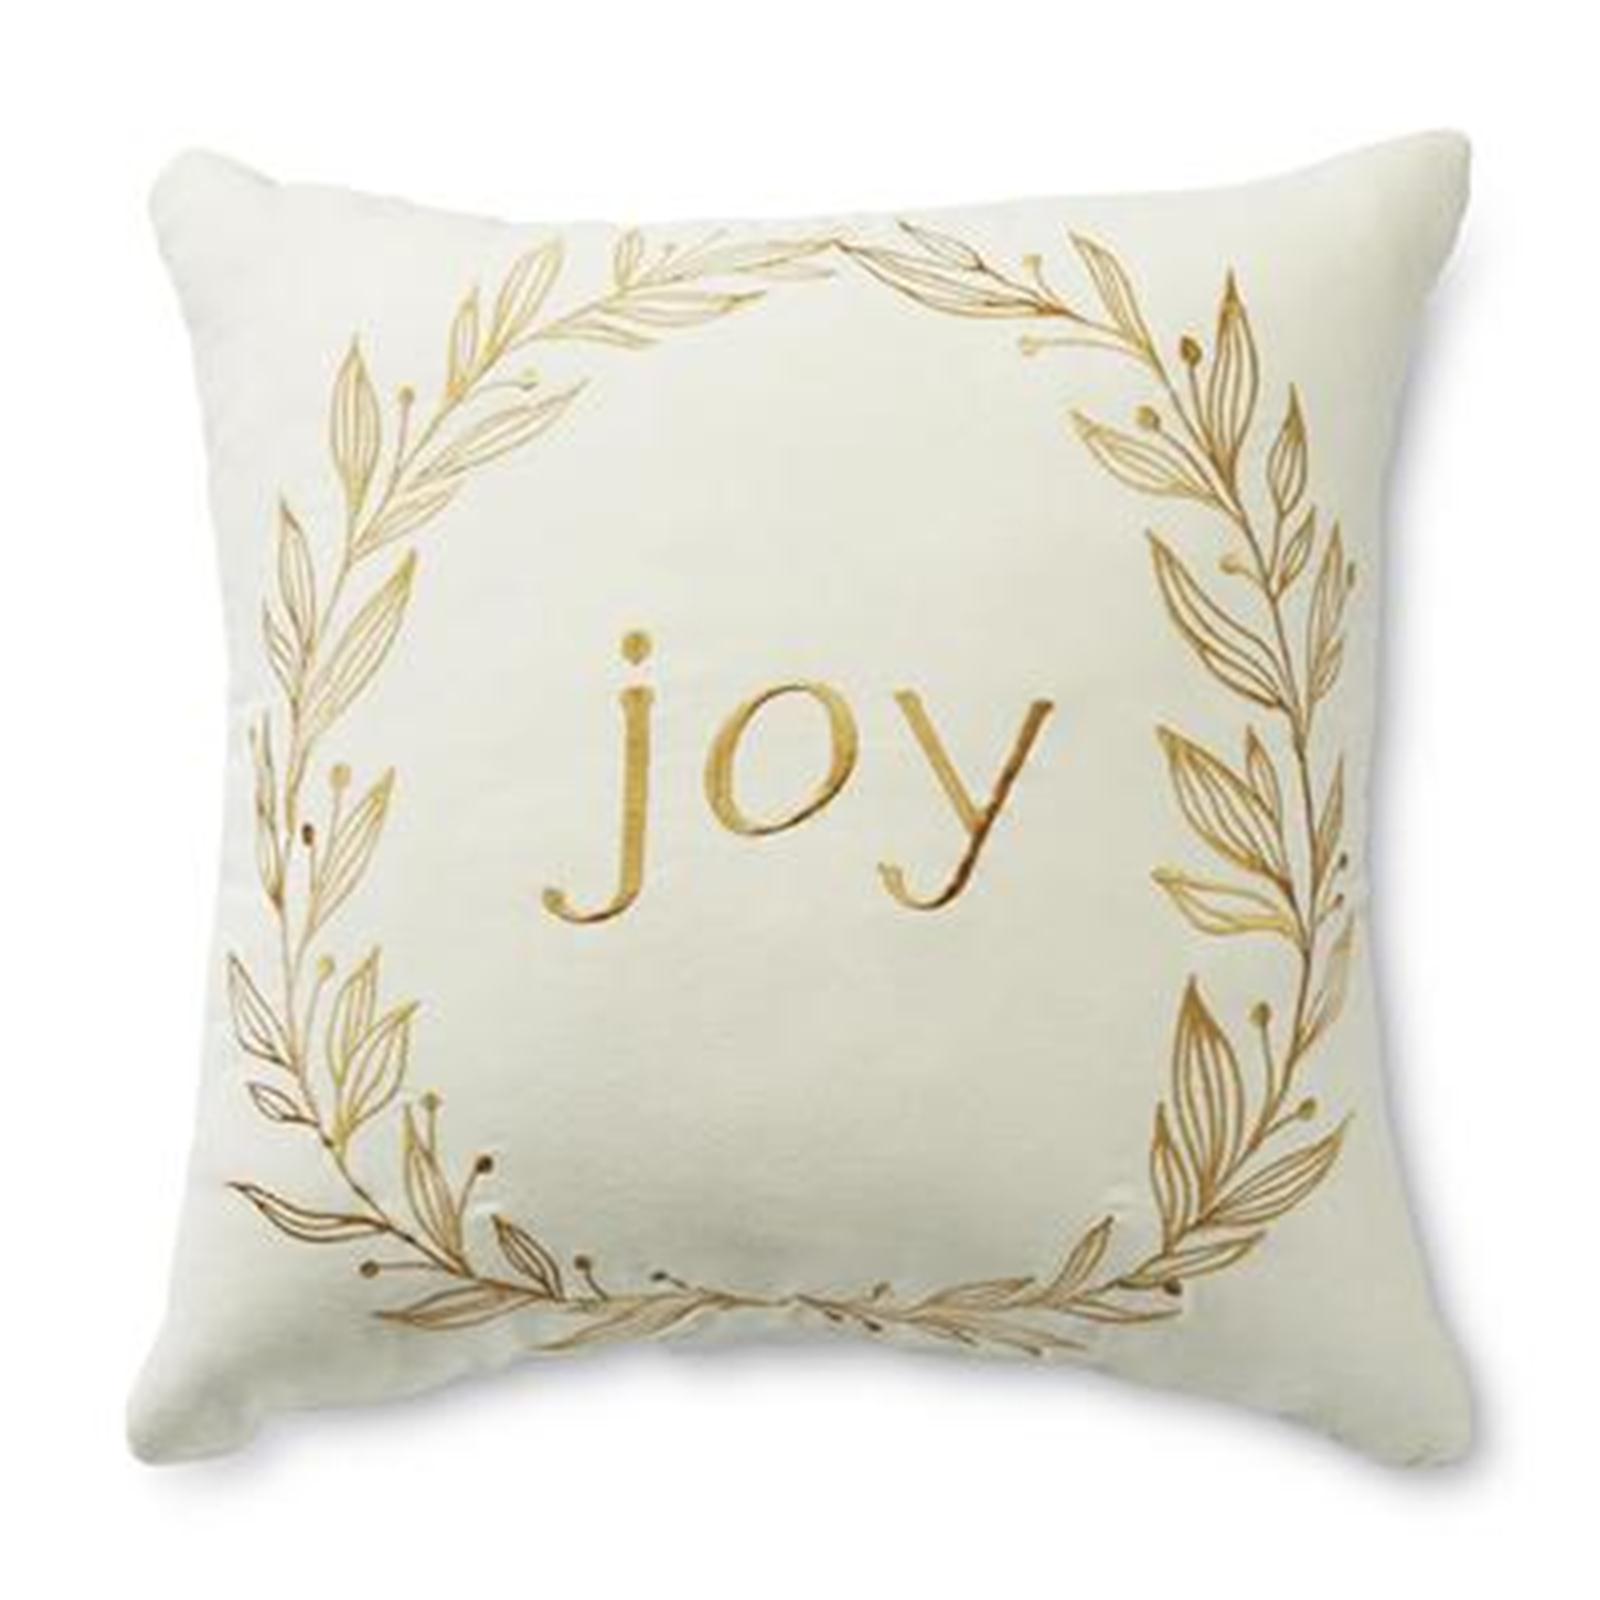 Cannon Microsuede Joy Holiday Pillow